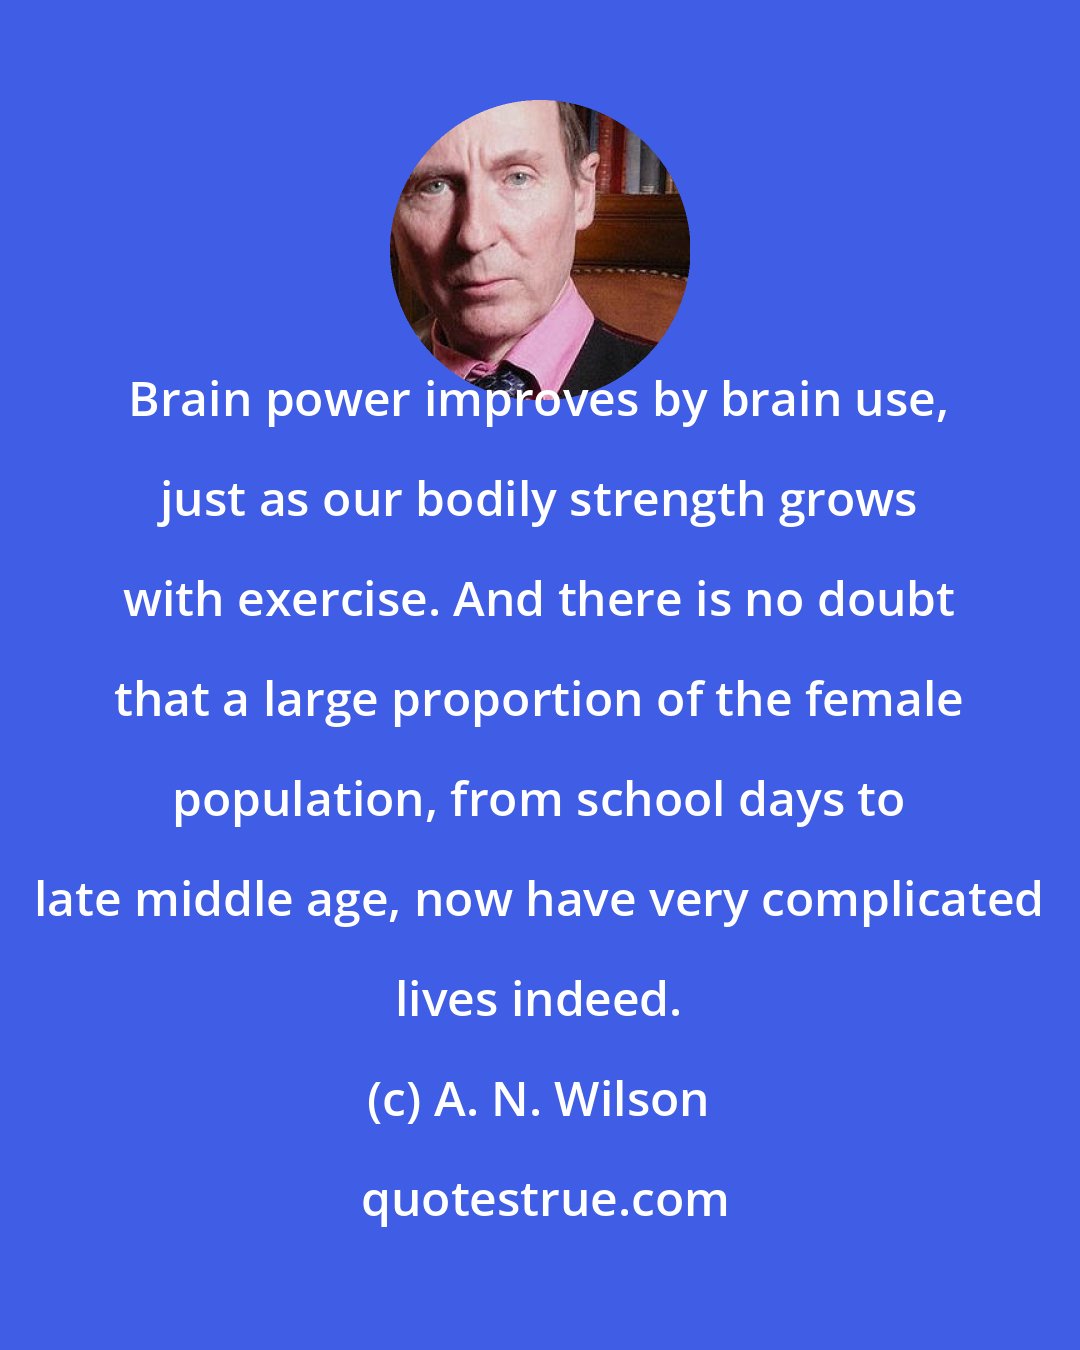 A. N. Wilson: Brain power improves by brain use, just as our bodily strength grows with exercise. And there is no doubt that a large proportion of the female population, from school days to late middle age, now have very complicated lives indeed.